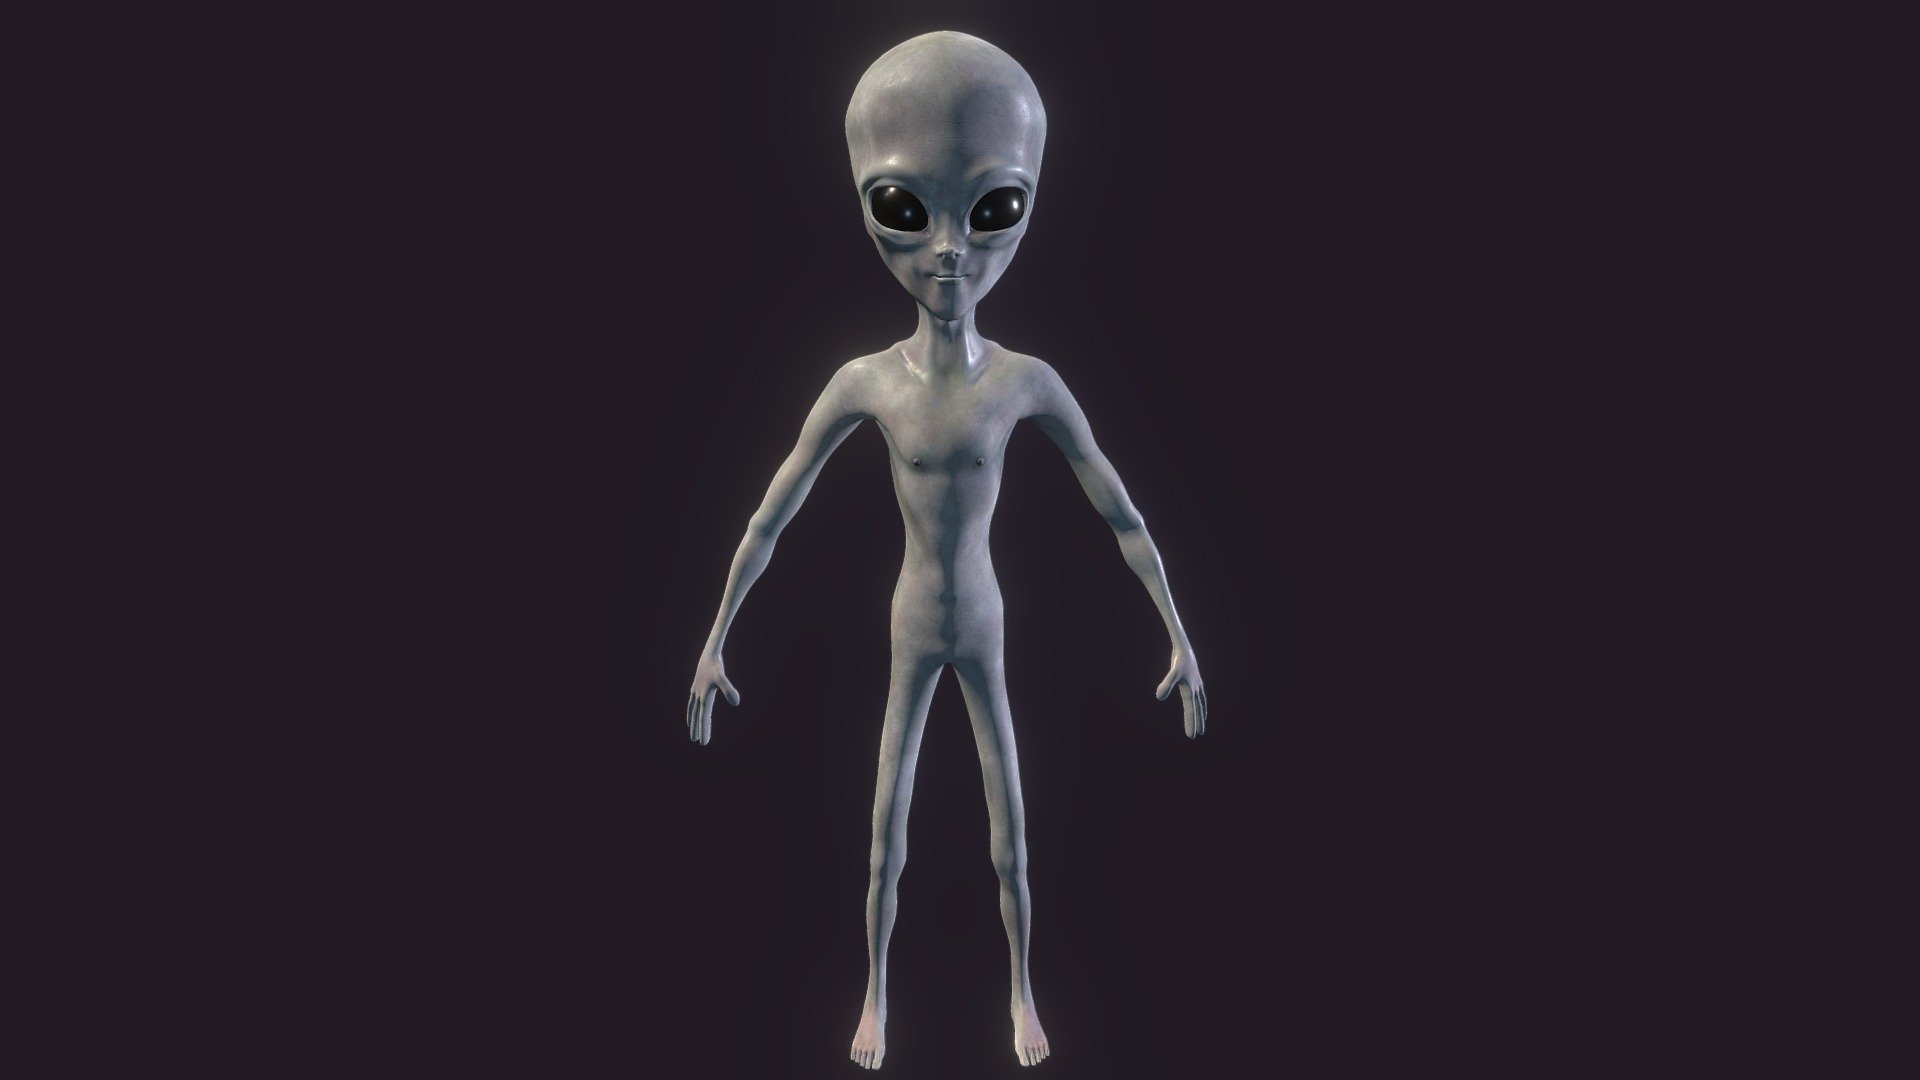 Low Poly Alien made In Blender, texturized Substance Painter. All Textures, materials and HDRI are included.

-Blender Project

-4k Texture Folder

-OBJ (Lowpoly and Highpoly version)

Extraterrestre hecho enBlender, texturizado con Substance Painter. Todas las texturas, materiales y HDRI vienen incluidas.

IMPORTANT!!

Not to be used in NFT’s No usar para NFTs - Alien Lowpoly (Gray) - Buy Royalty Free 3D model by DrFeelgood (@dr.feelgood) 3d model